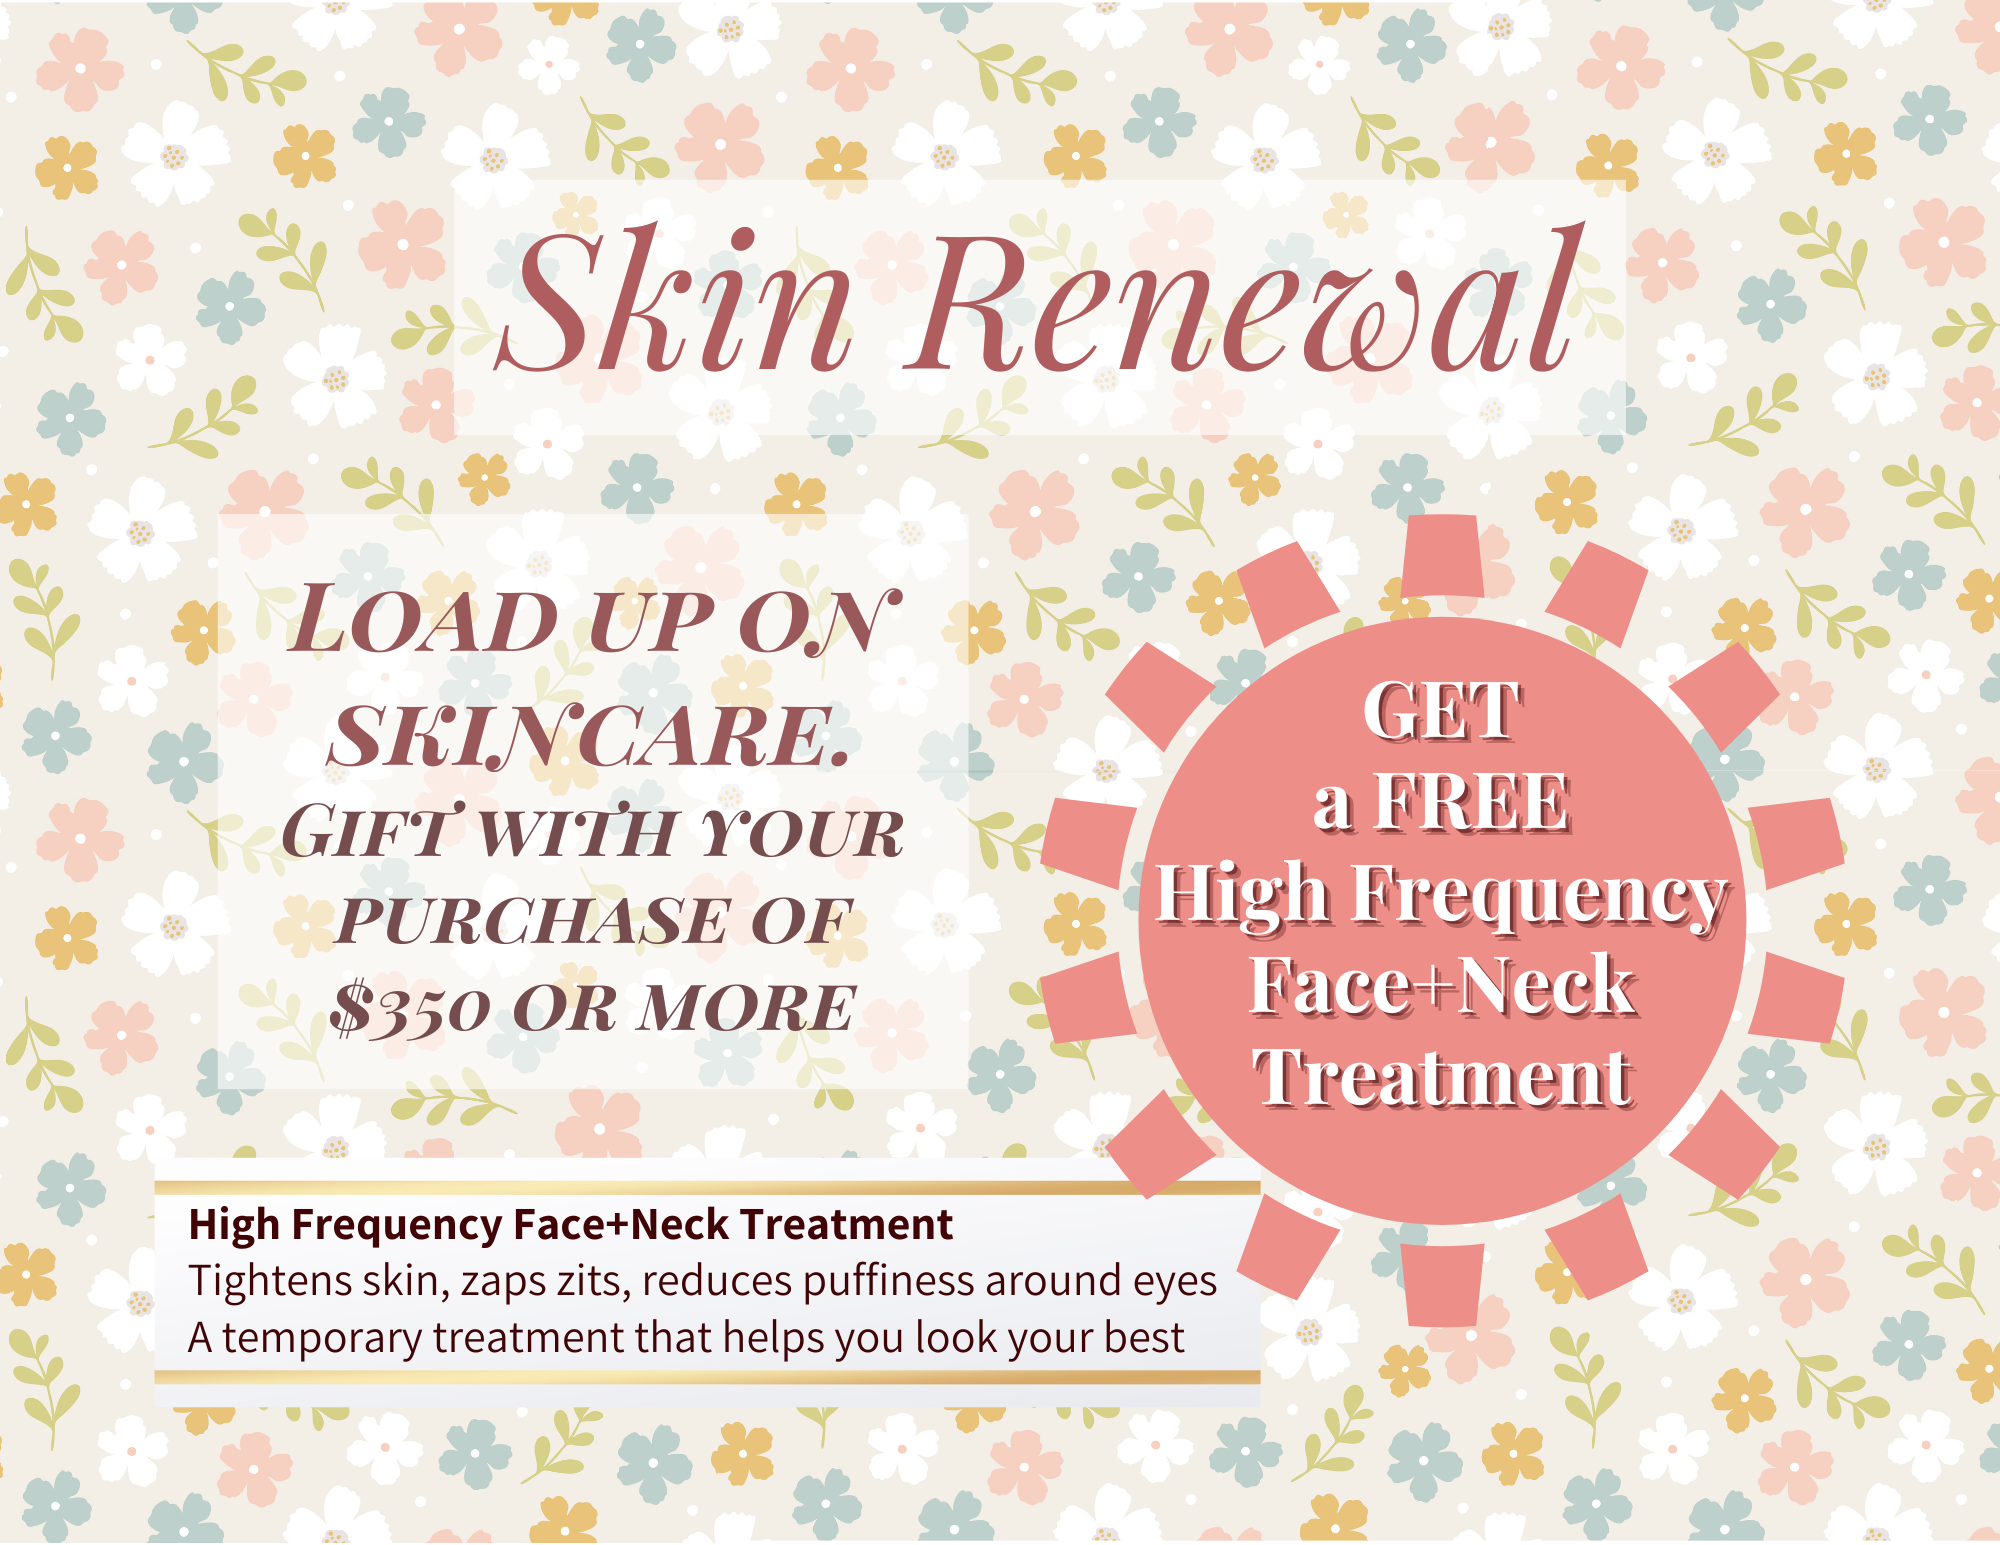 Get a free High Frequency Face+Neck treatment with skincare purchase of $350 or more